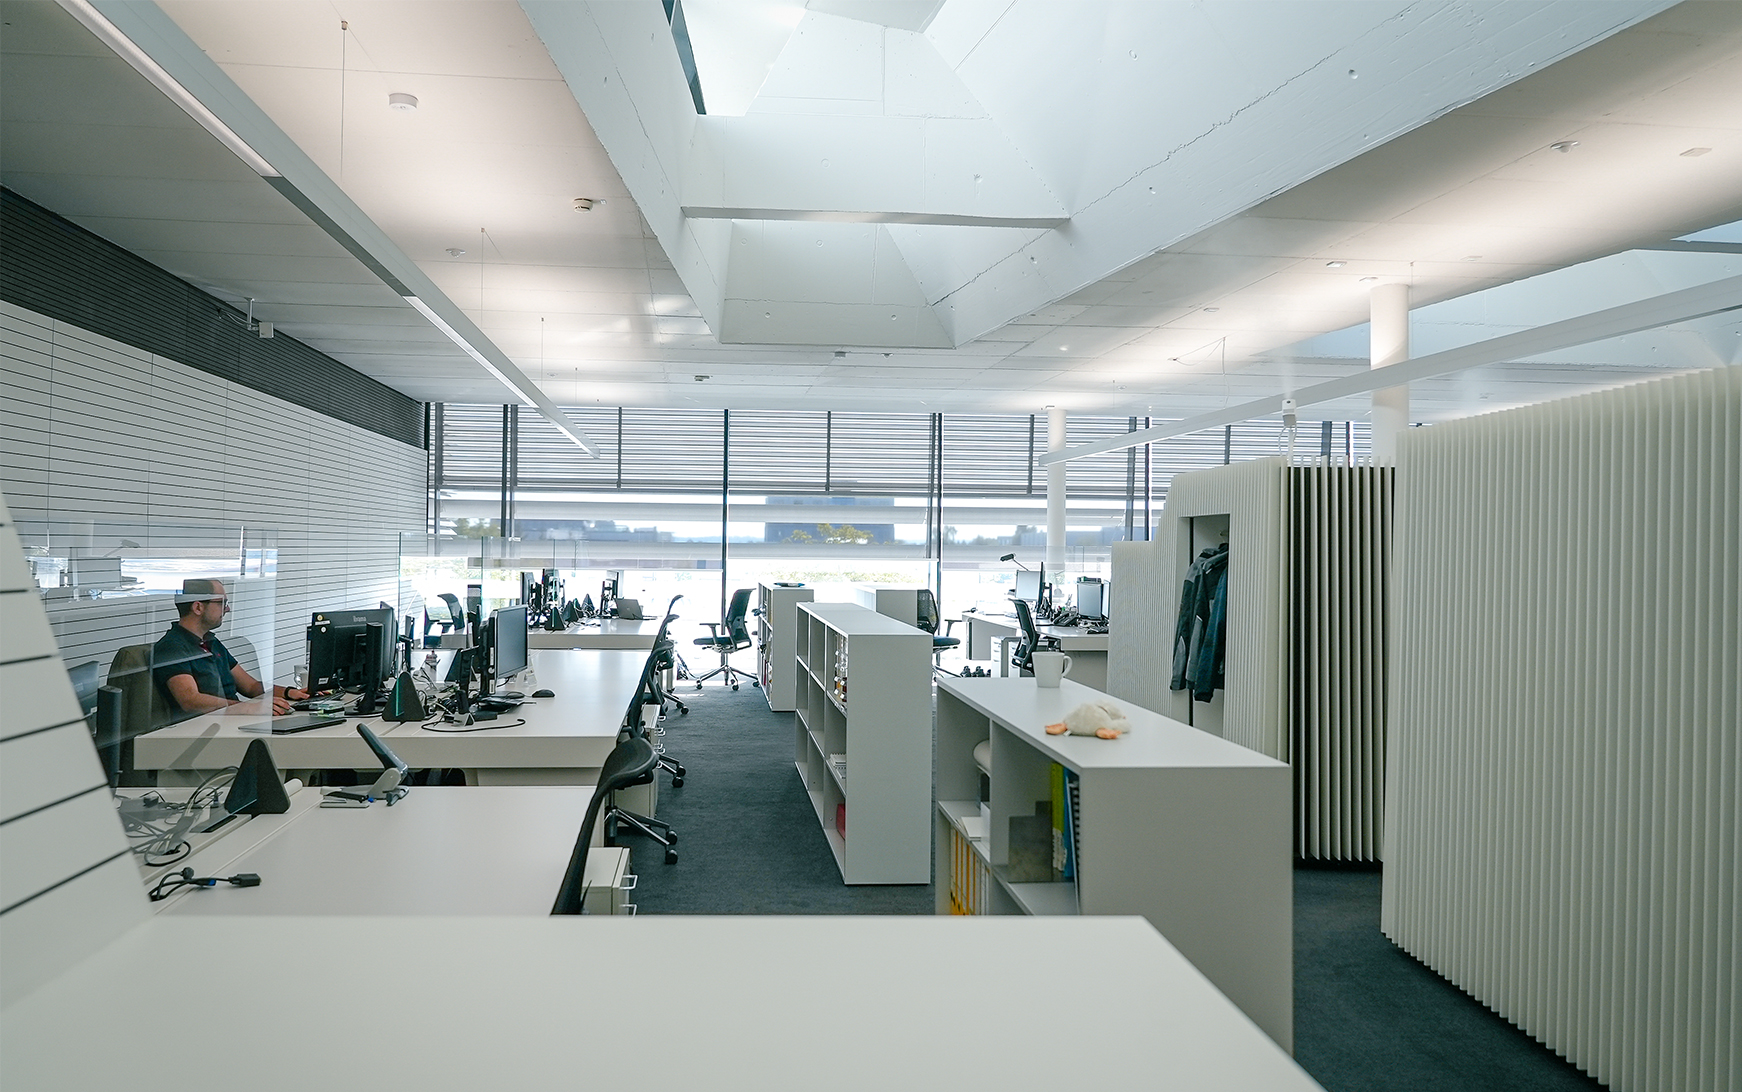 At façade specialist seele, focus lies on good equipment and a comfortable indoor climate for the office workplaces as well as on ergonomics and comfort in our production facilities.